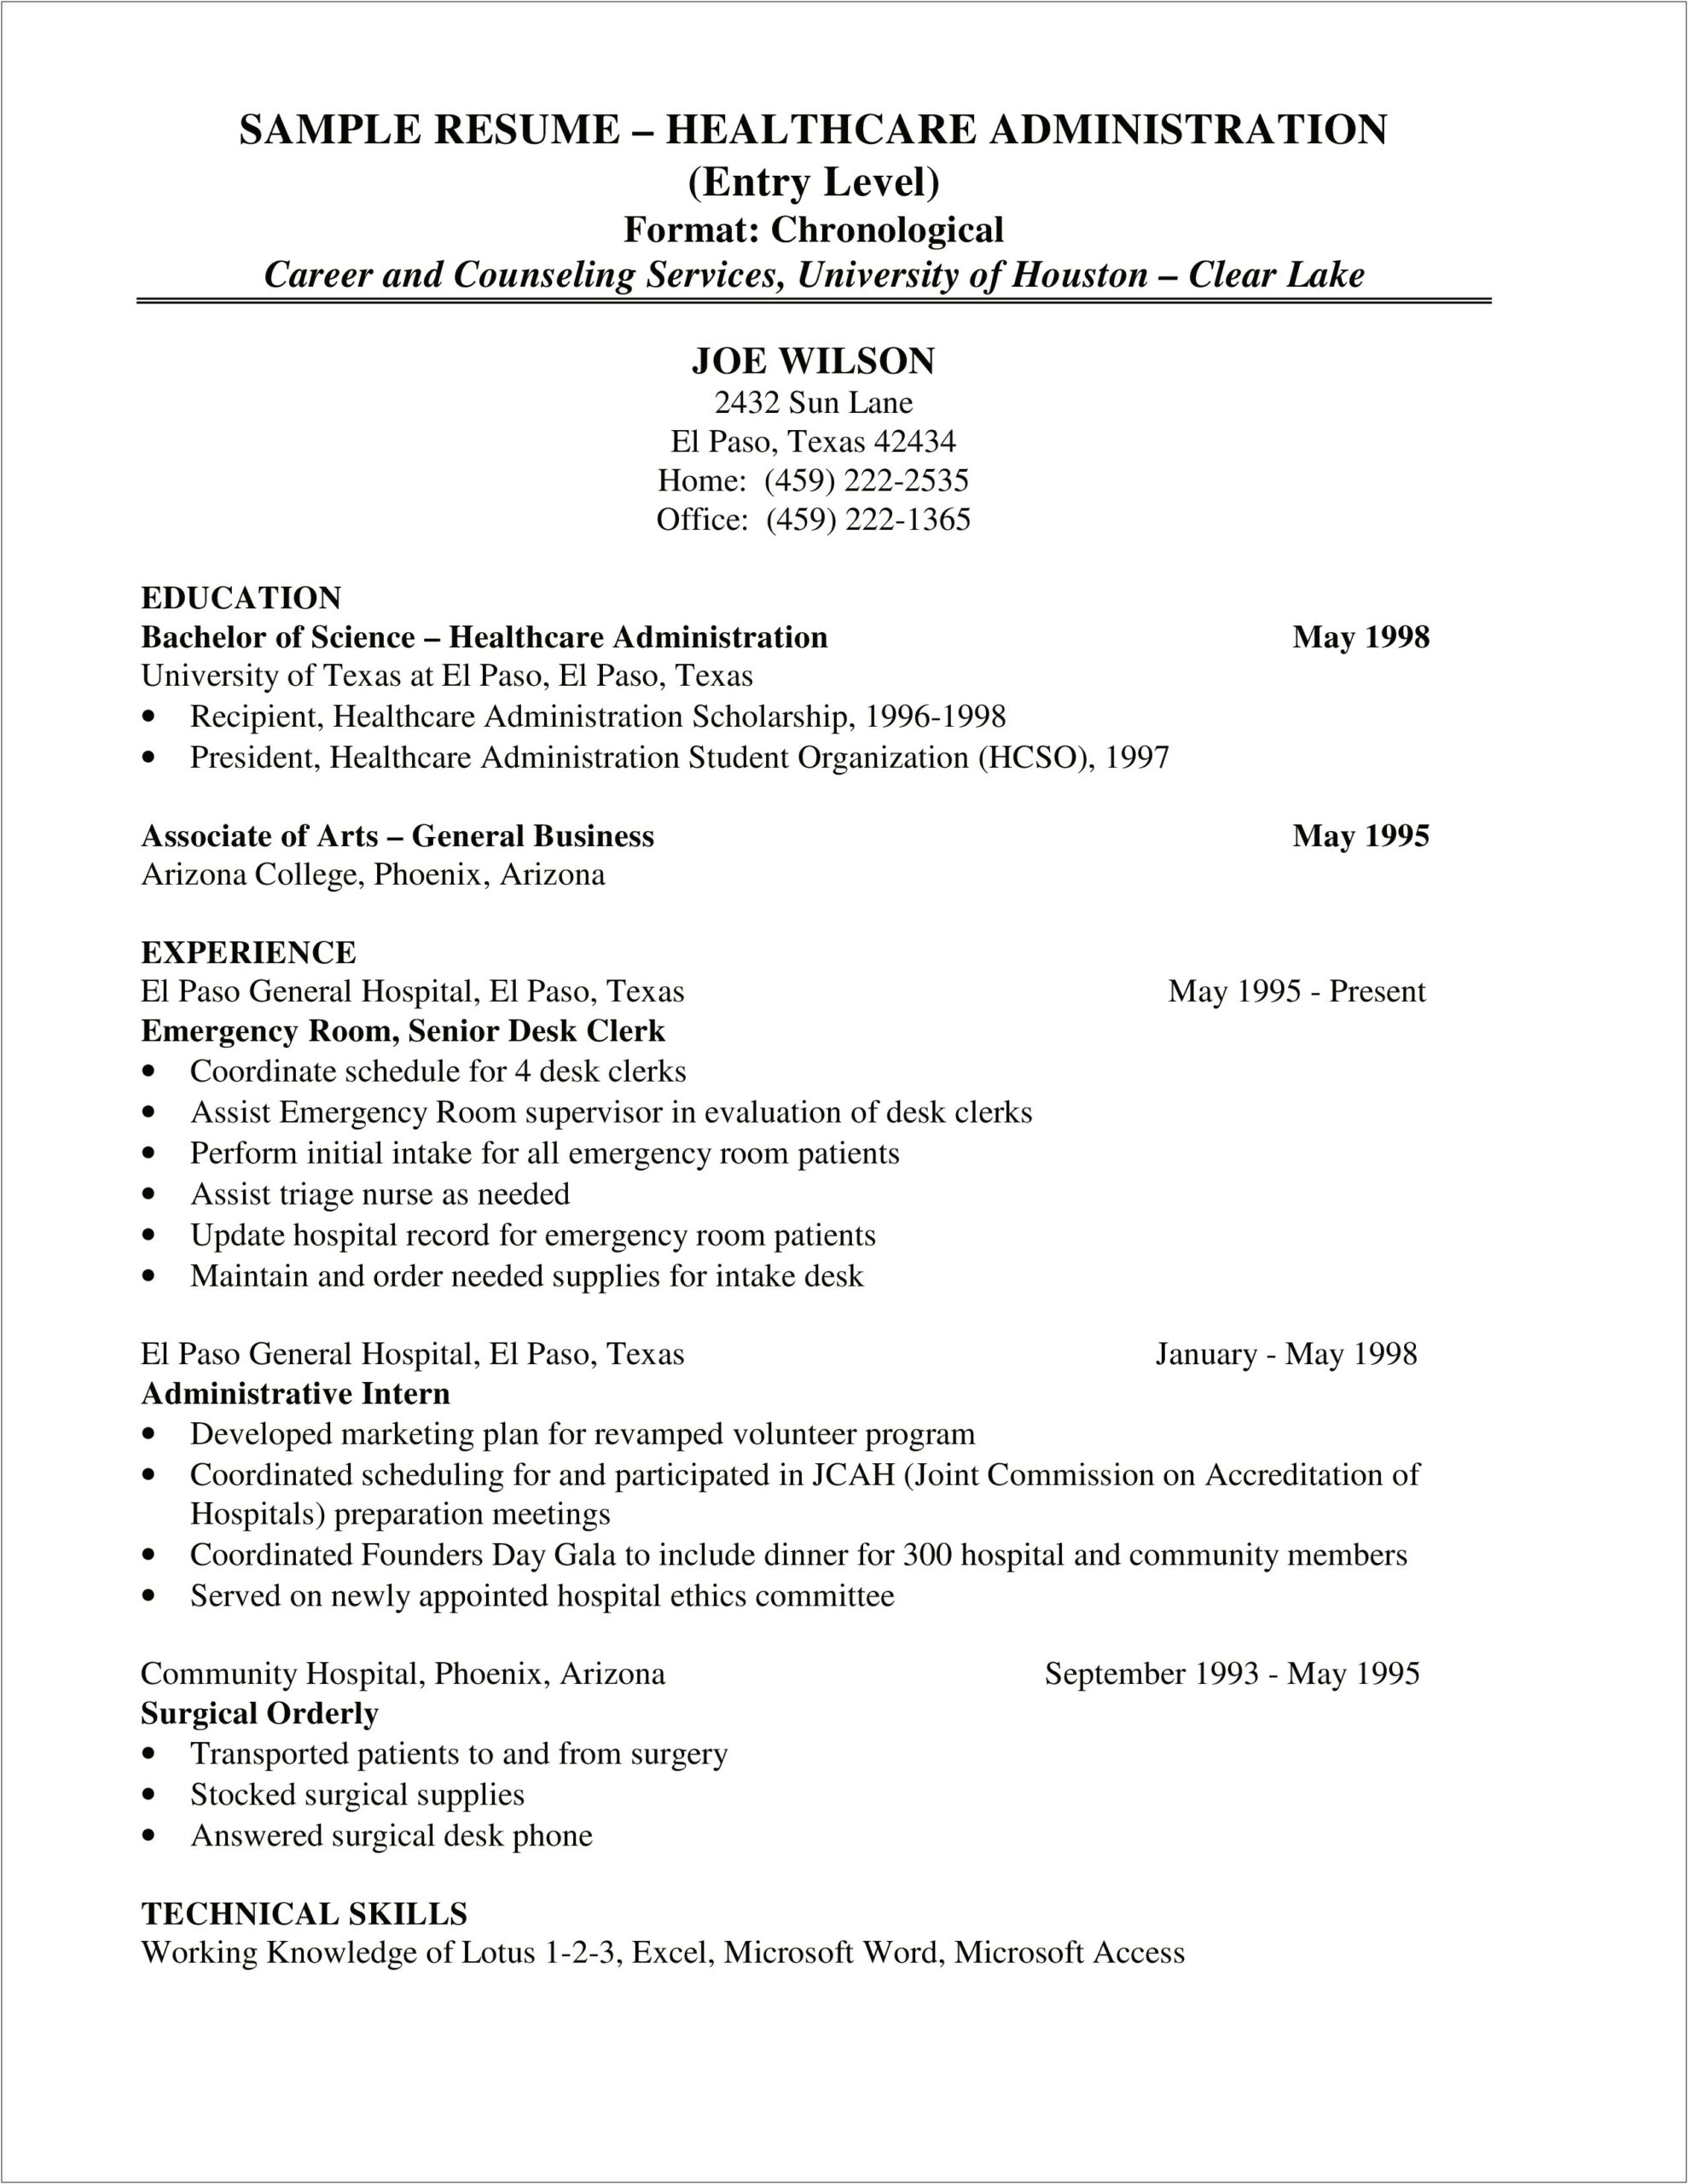 Resume Samples School Counselor Entry Level